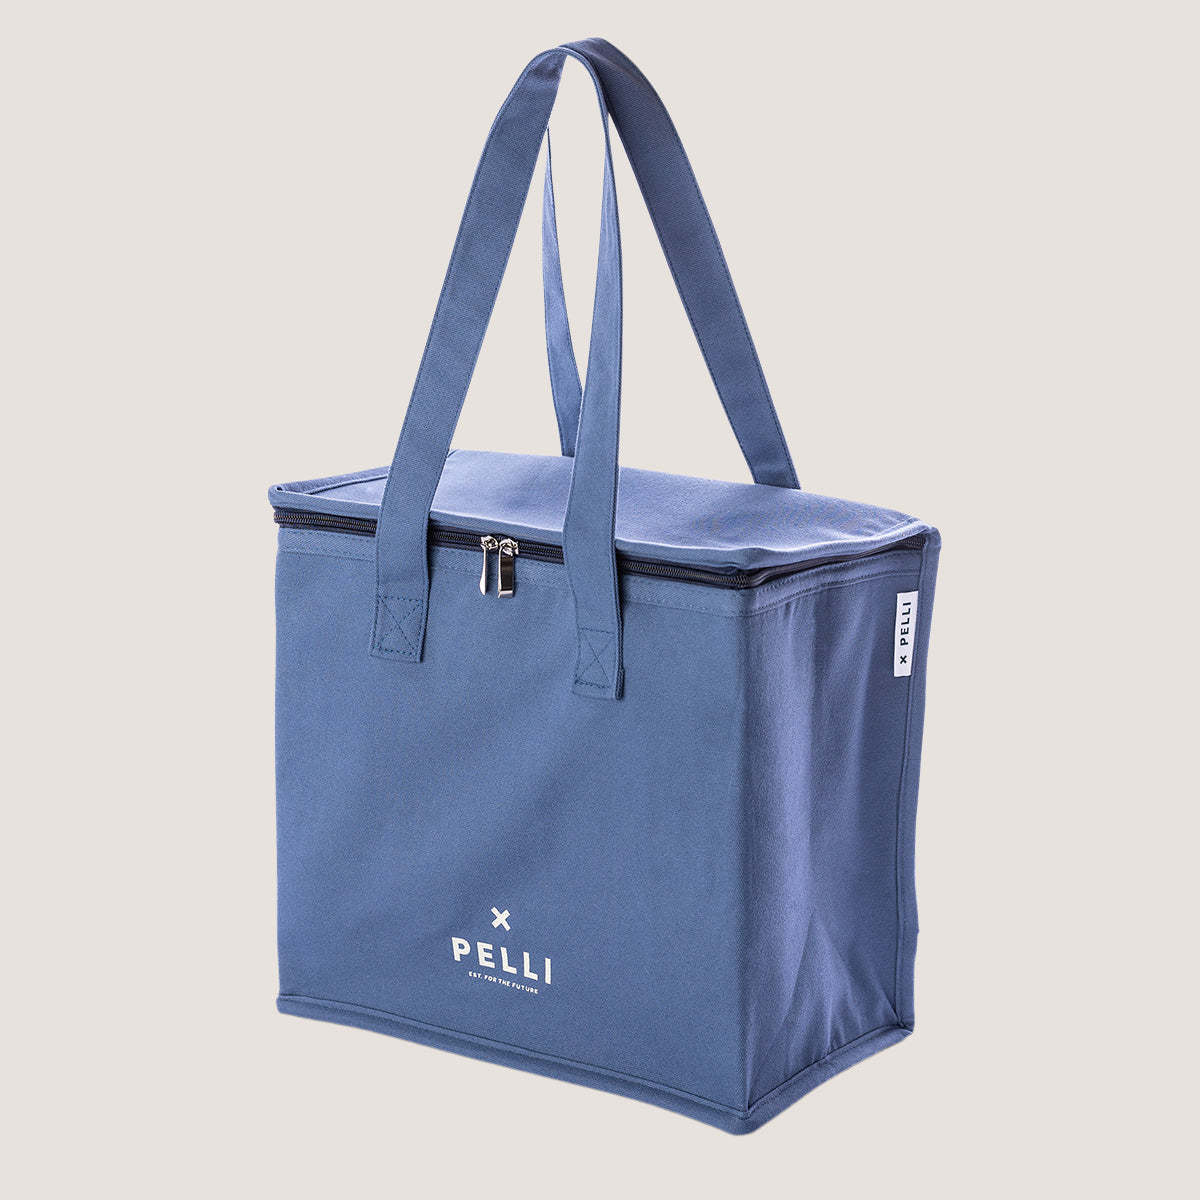 A canvas medium cooler bag in ocean blue with straps held up